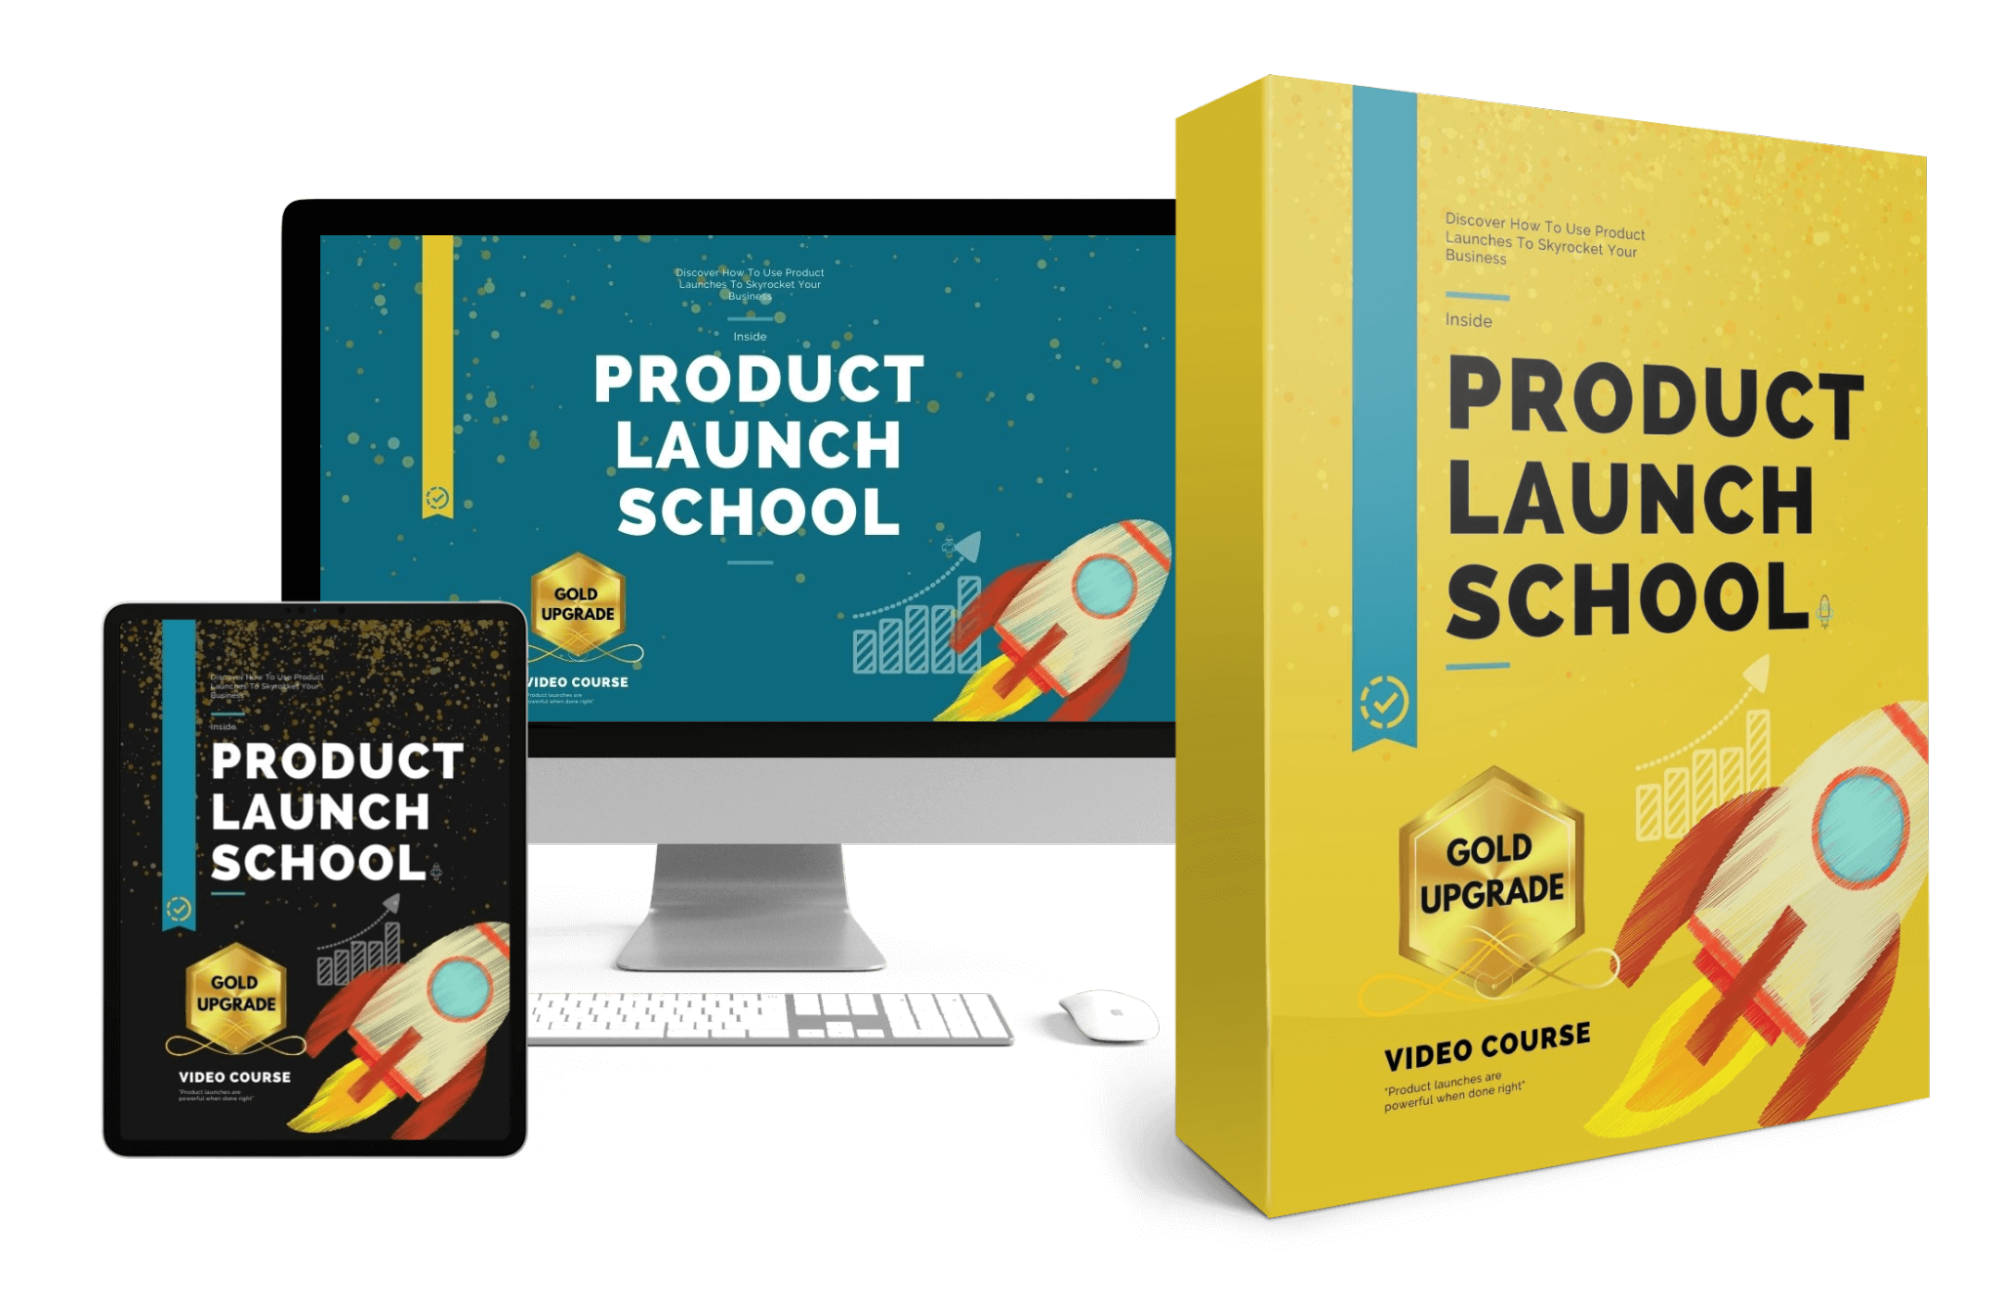 Product Launch School – 27 minutes